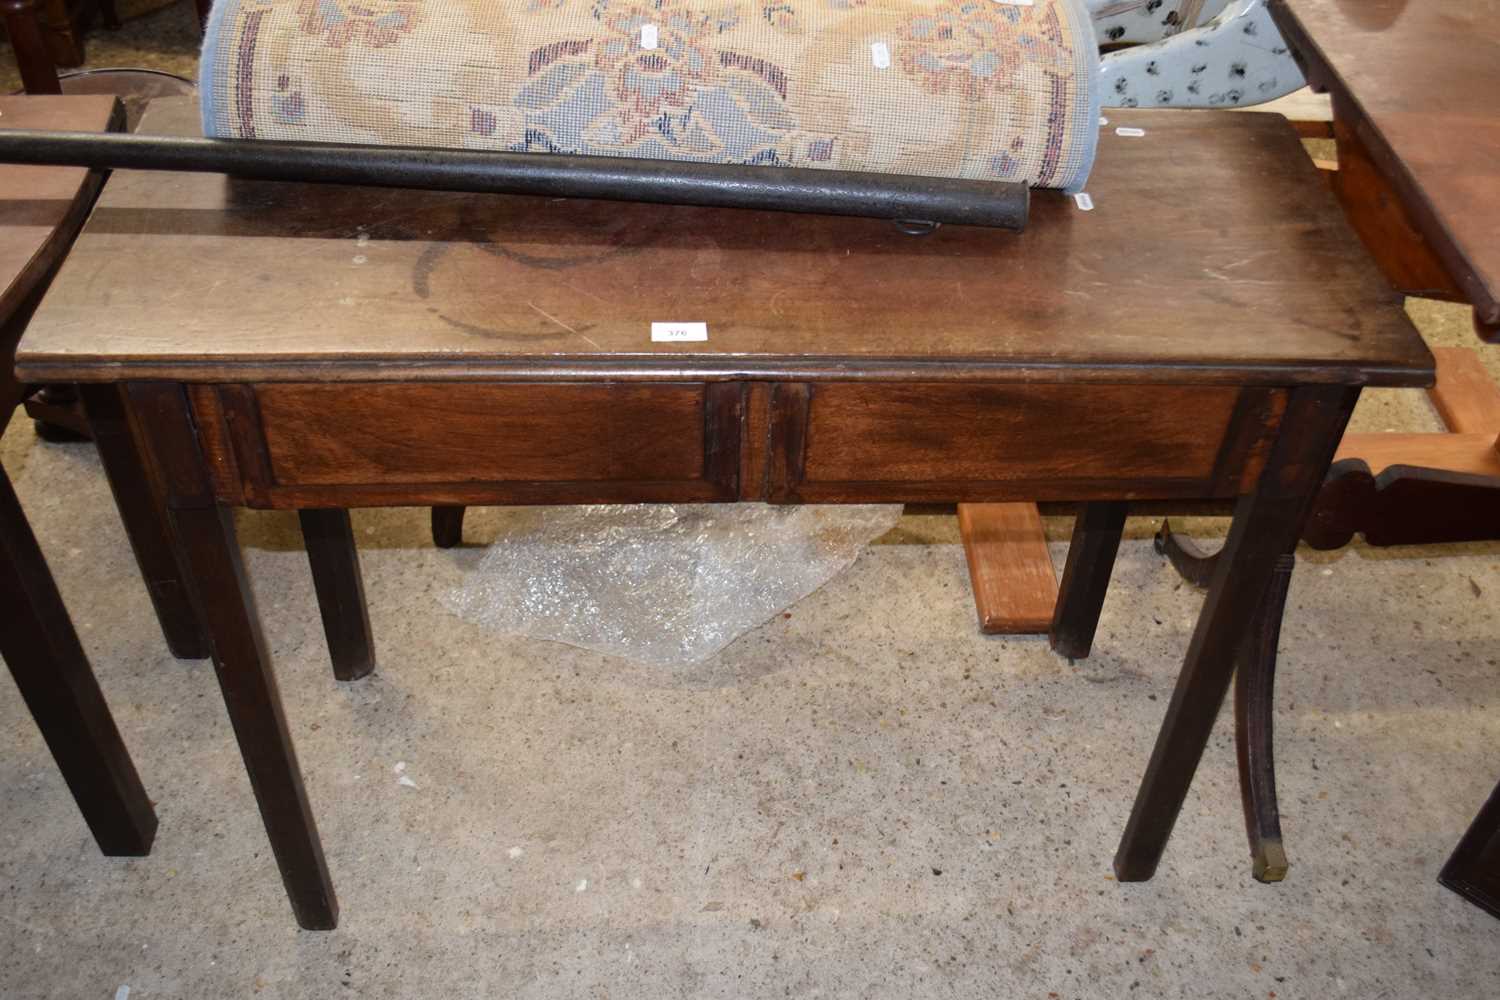 19th Century mahogany side table converted from a drop leaf table